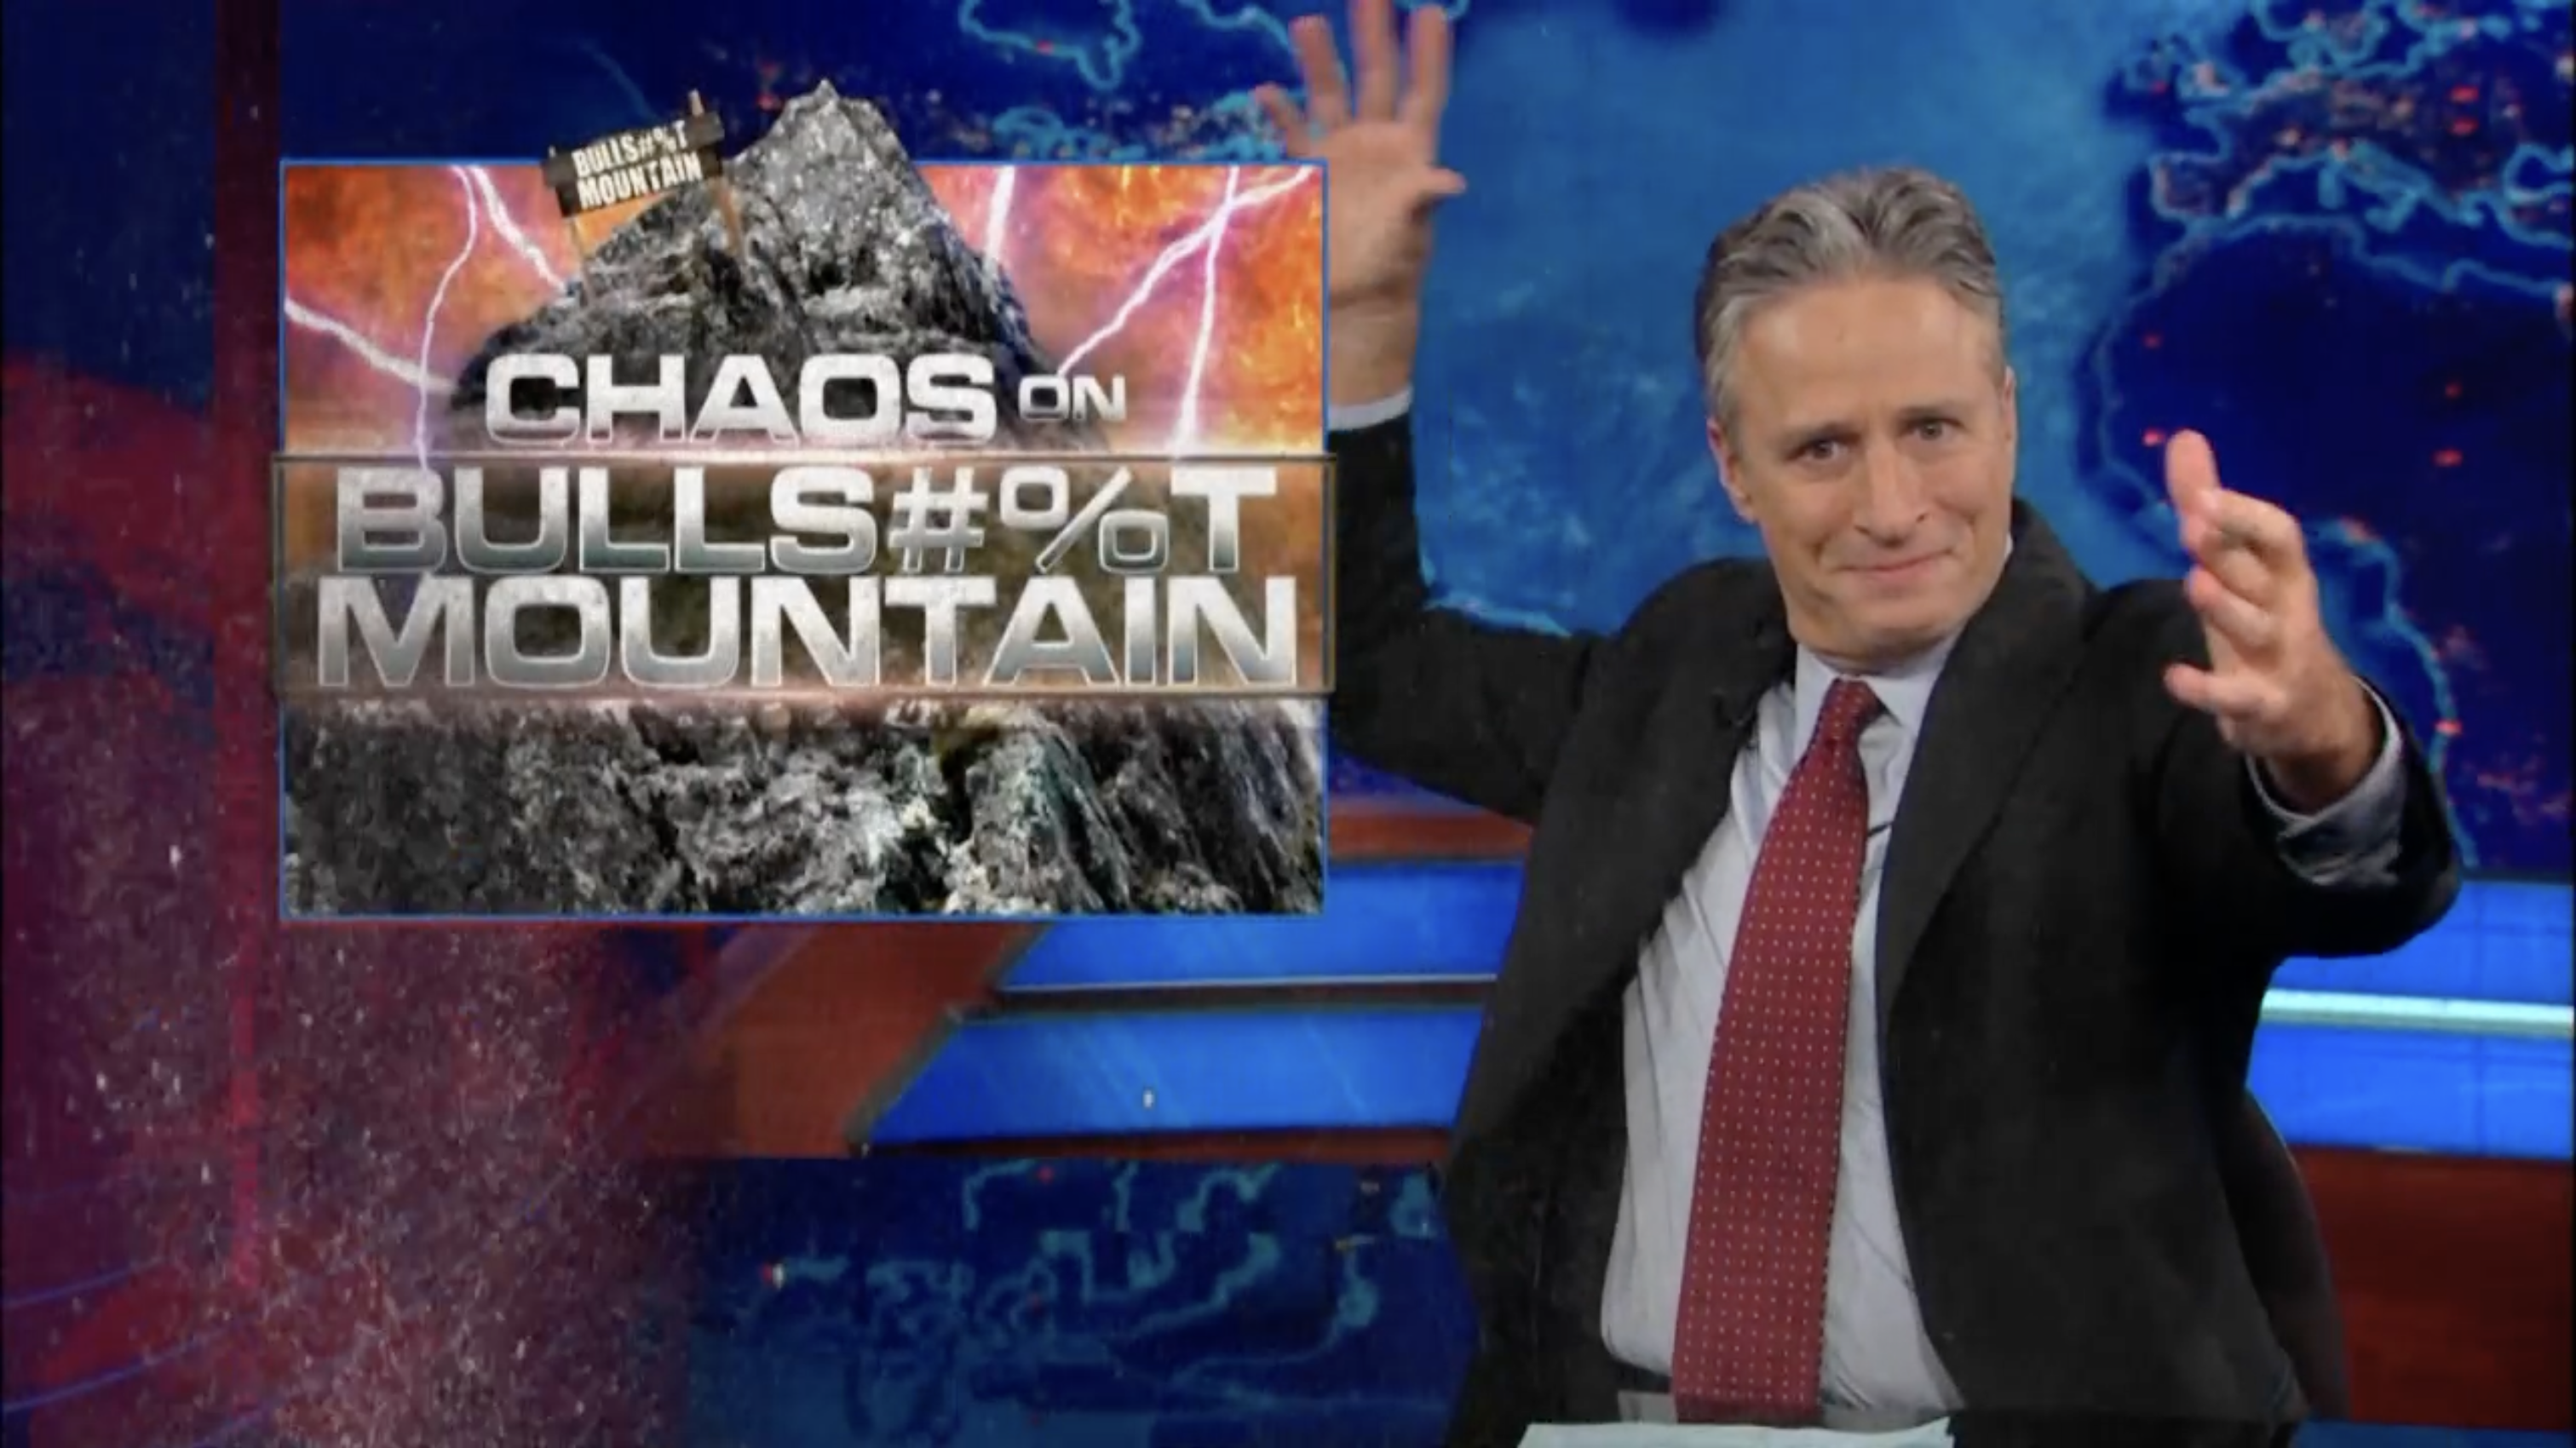 Jon Stewart introducing a segment on The Daily Show with the title 'Chaos on Bullshit Mountain'